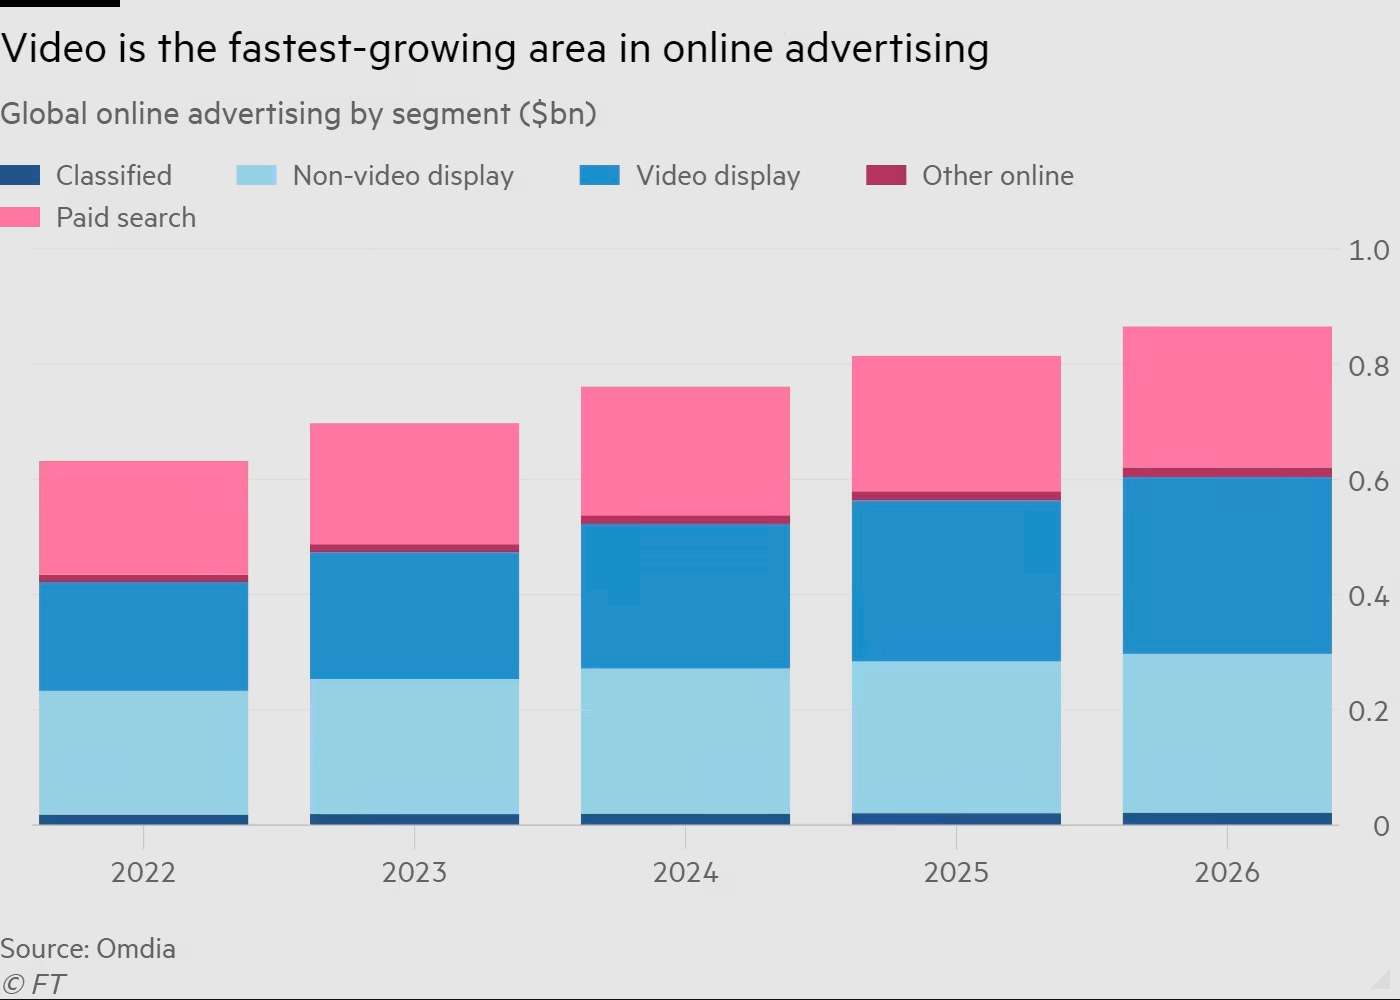 a graph from the above linked Financial Times article that shows the projected breakdown of digital ad spend through 2026, with Video display growing the most